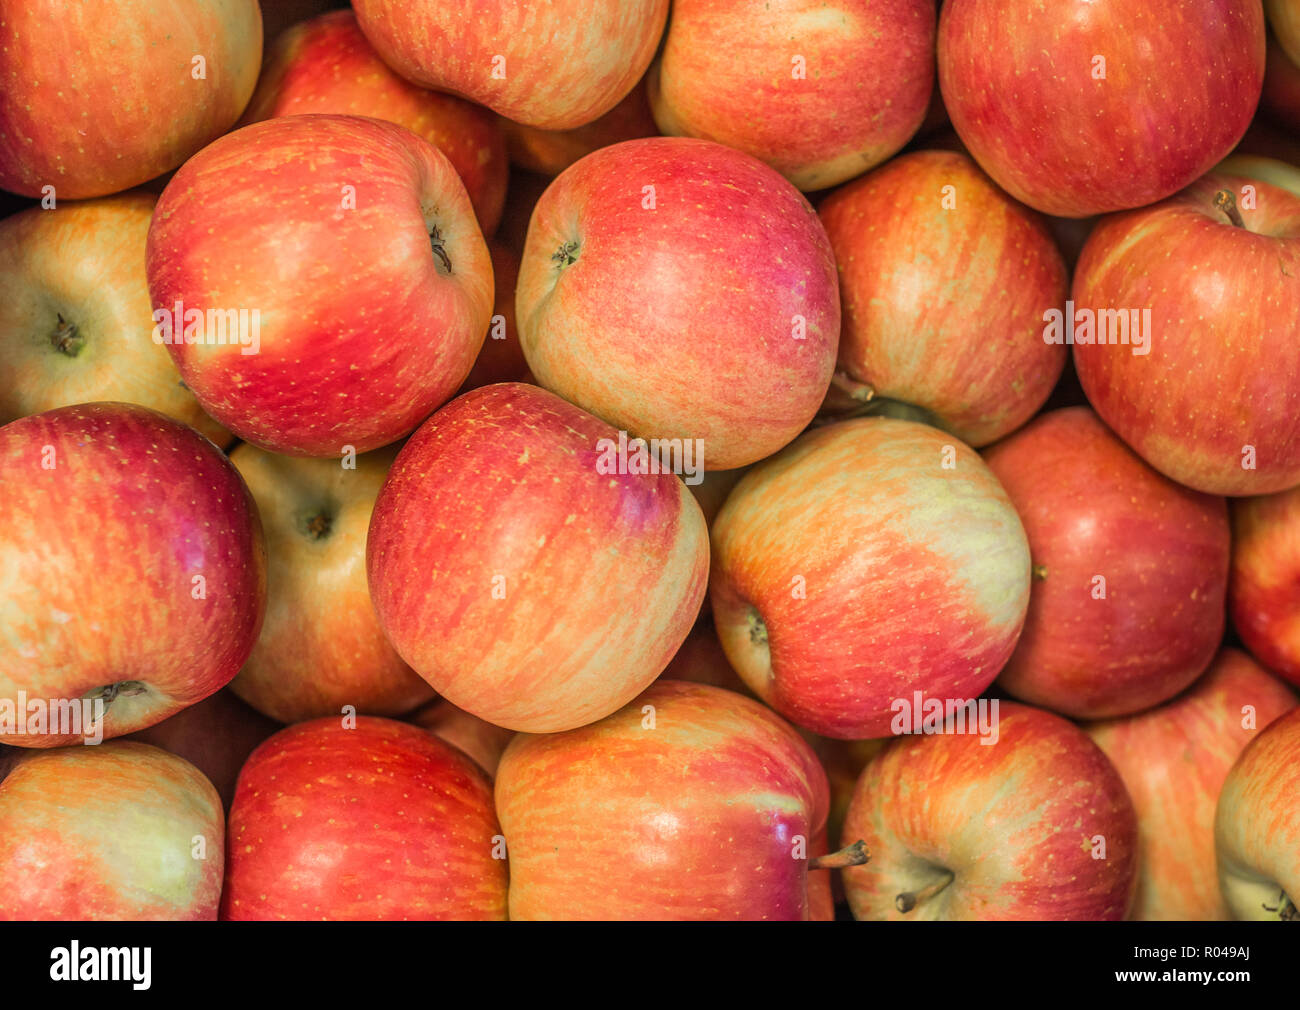 Fresh apples'Fuji' variety grown in the apple country South Tyrol, northern Italy. Apple suitable for cakes. Stock Photo